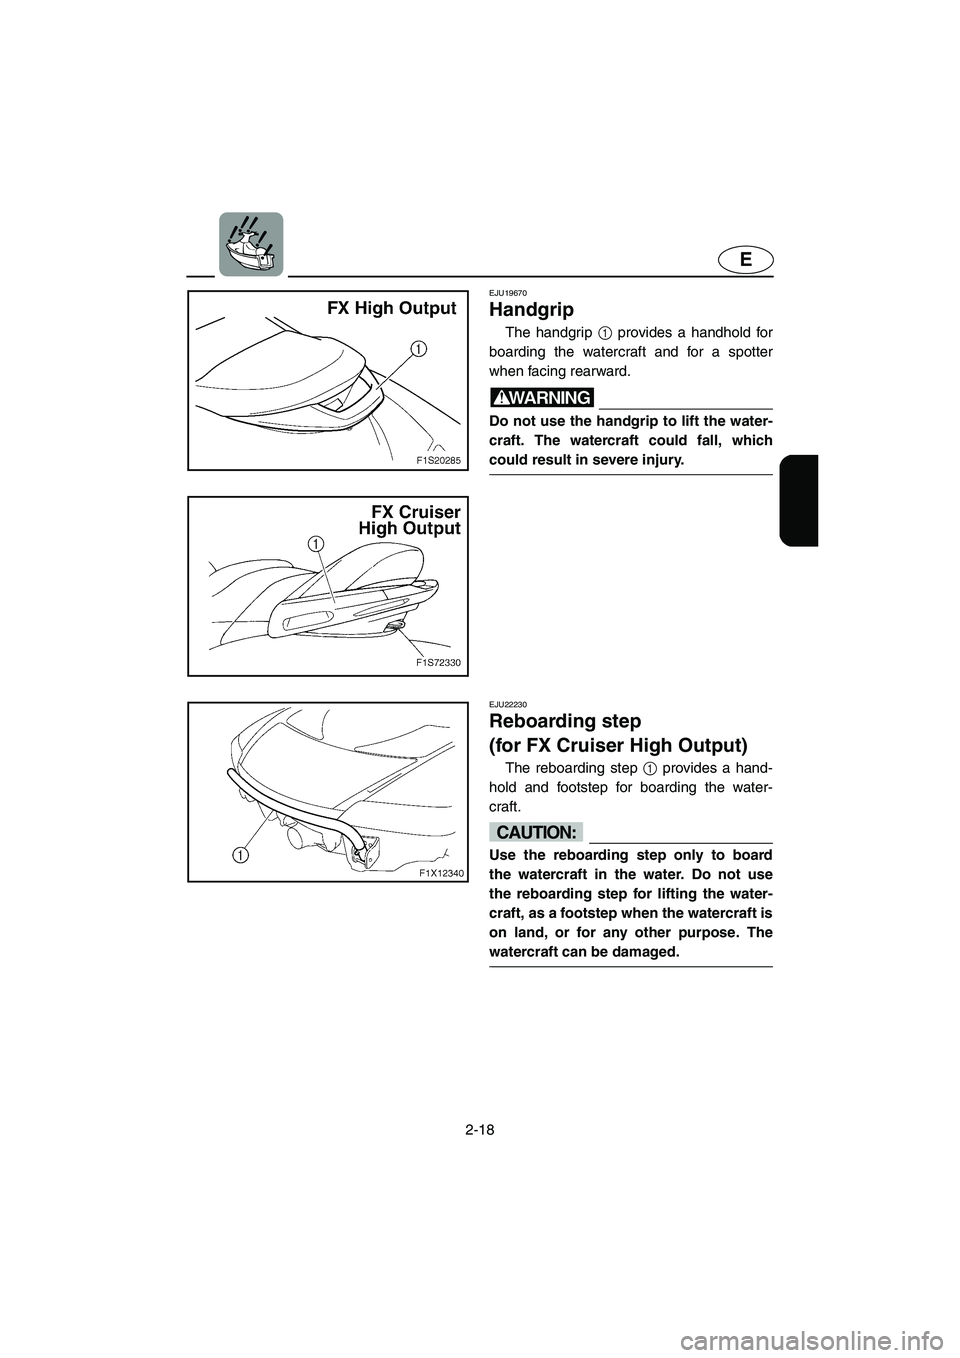 YAMAHA FX HO 2006 Service Manual 2-18
E
EJU19670 
Handgrip 
The handgrip 1 provides a handhold for
boarding the watercraft and for a spotter
when facing rearward.
WARNING@ Do not use the handgrip to lift the water-
craft. The watercr